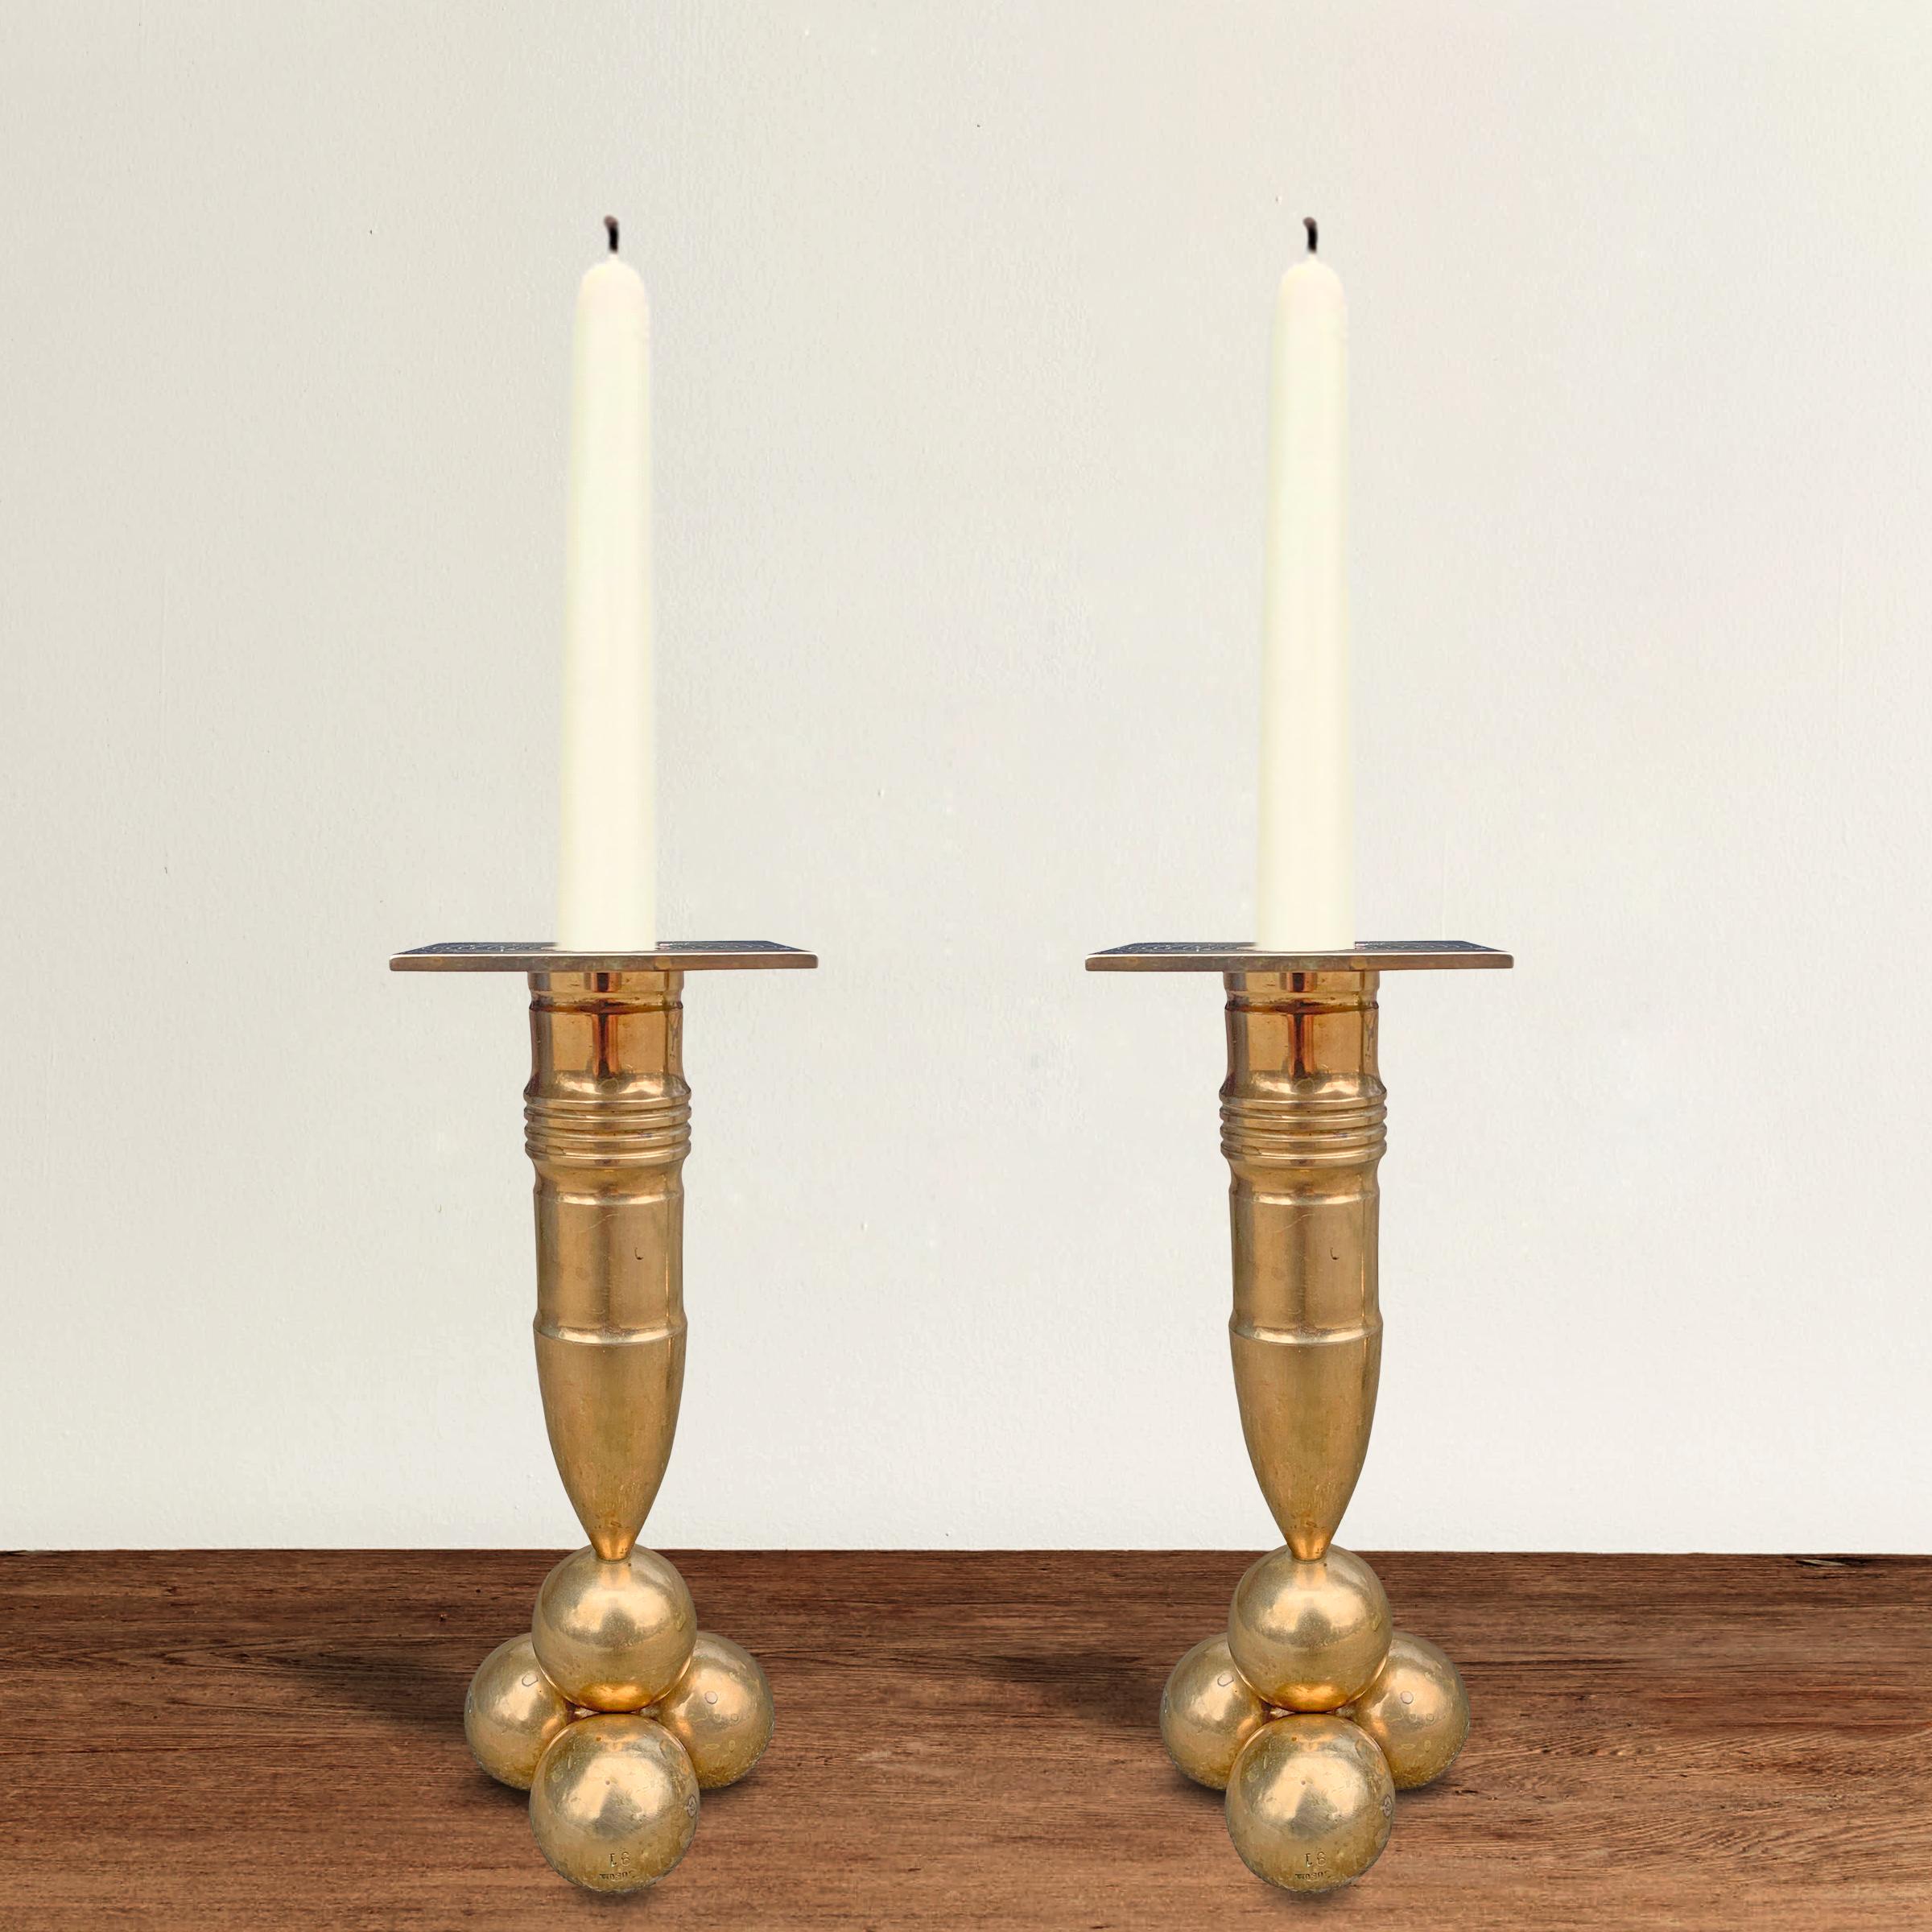 A rare pair of mid-20th century bronze candlesticks with artillery shell stems, each resting on a stack of cannonballs, by Swedish designer Gusum Mässing.